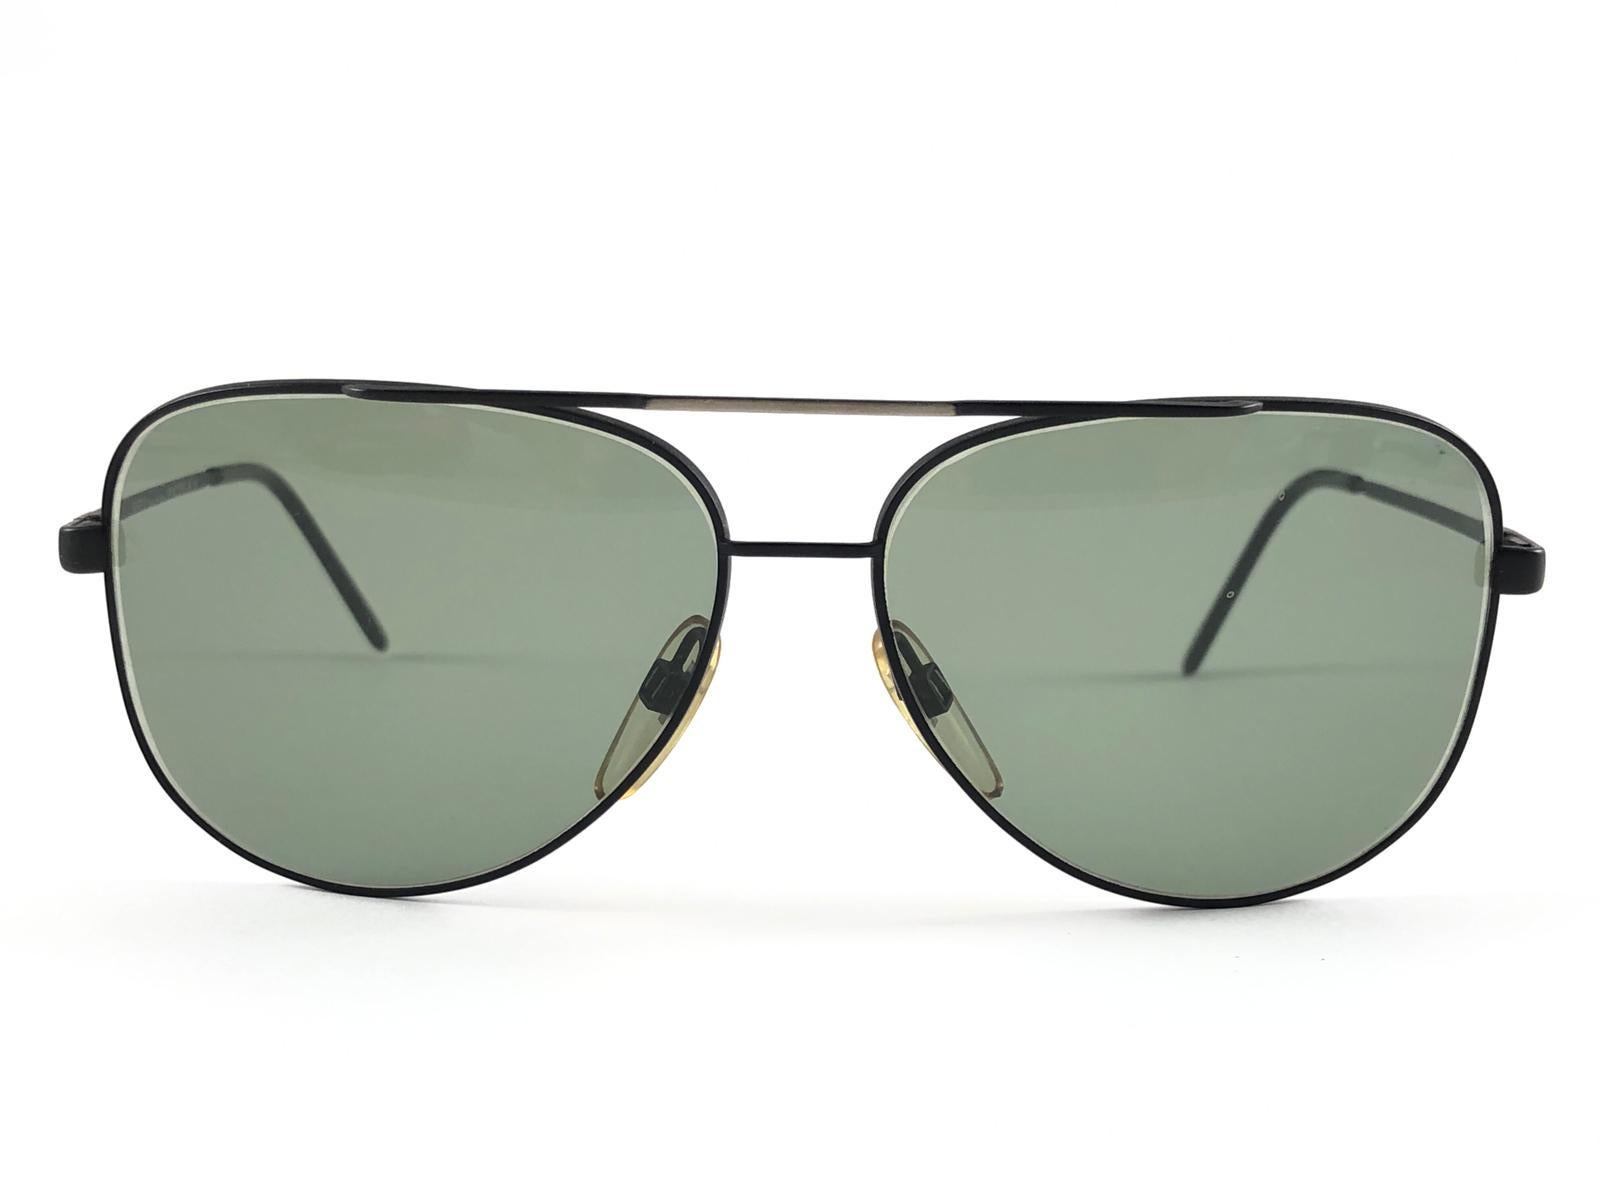 New Vintage Safilo a balanced combination of Italian craftsmanship, design, functionality and striking aesthetics, this model showcases a Black mate frame holding green lenses


New, never worn or displayed.
Made in Italy.

Measurements

Front      